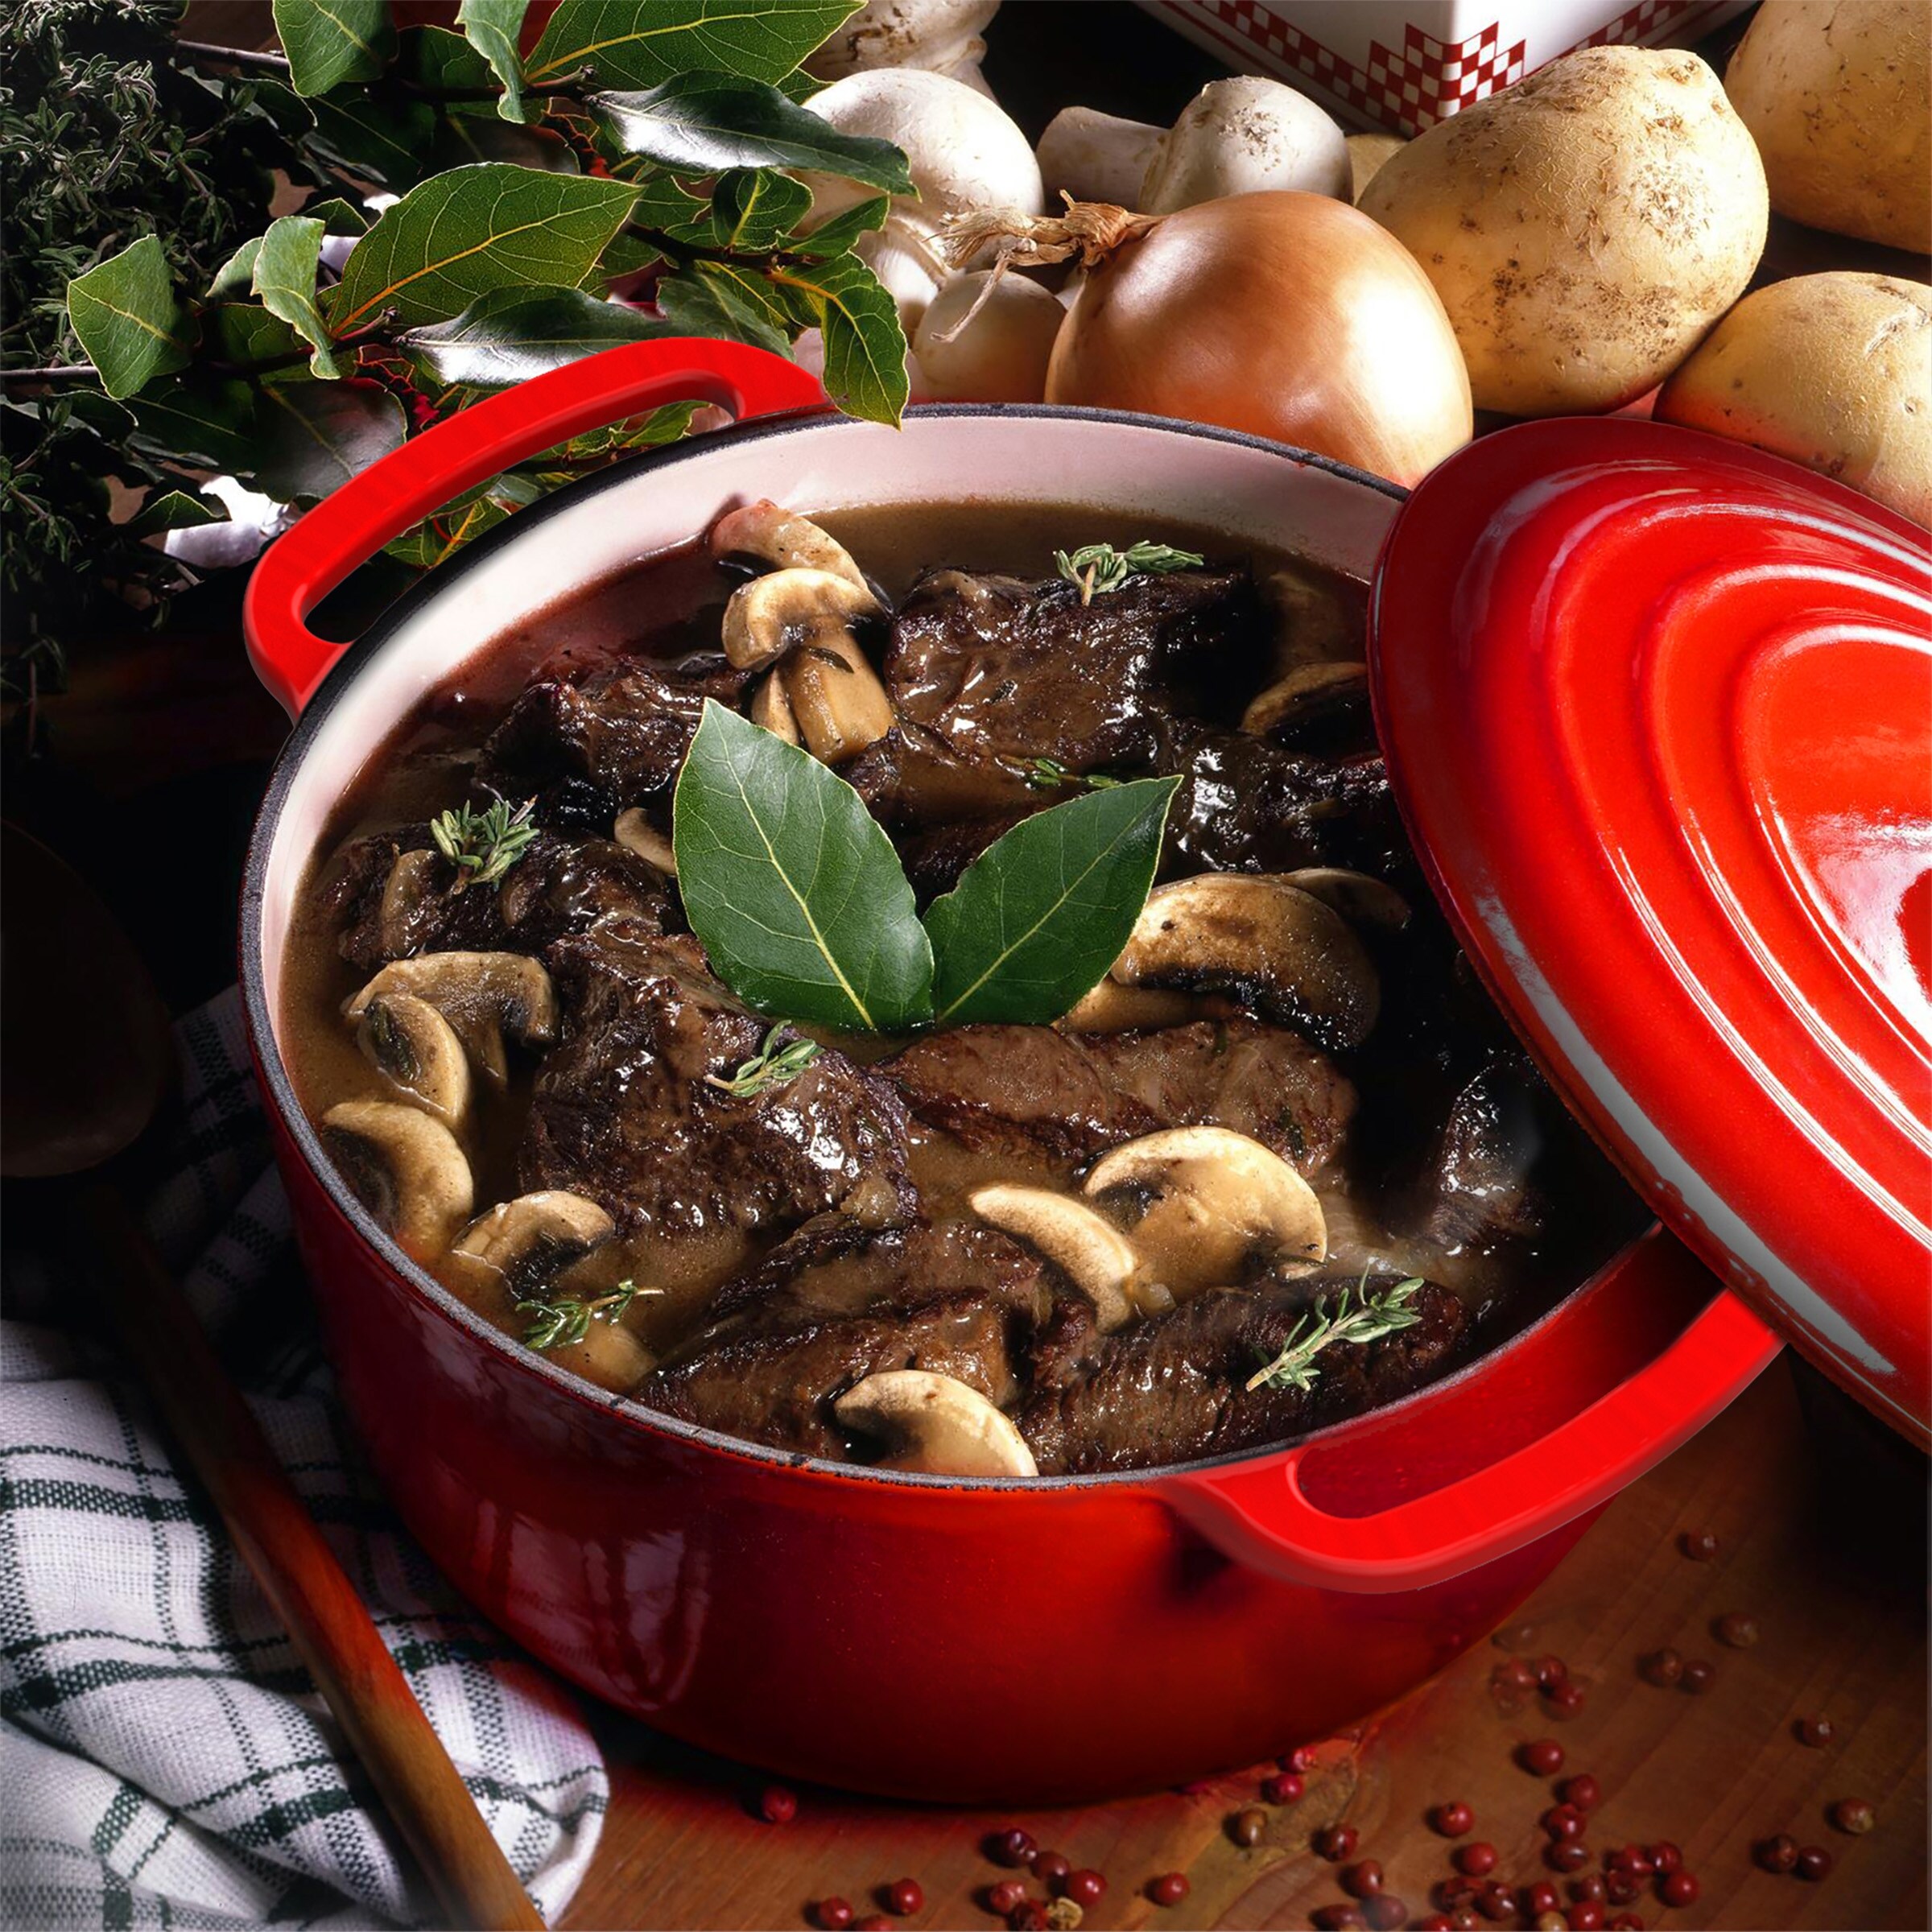 https://ak1.ostkcdn.com/images/products/is/images/direct/59bb88ab55705035c50fe3d4c6277758995dd5e3/Cast-Iron-Dutch-Oven-with-Enamel-Coated-Pot-for-Oven-or-Stovetop.jpg